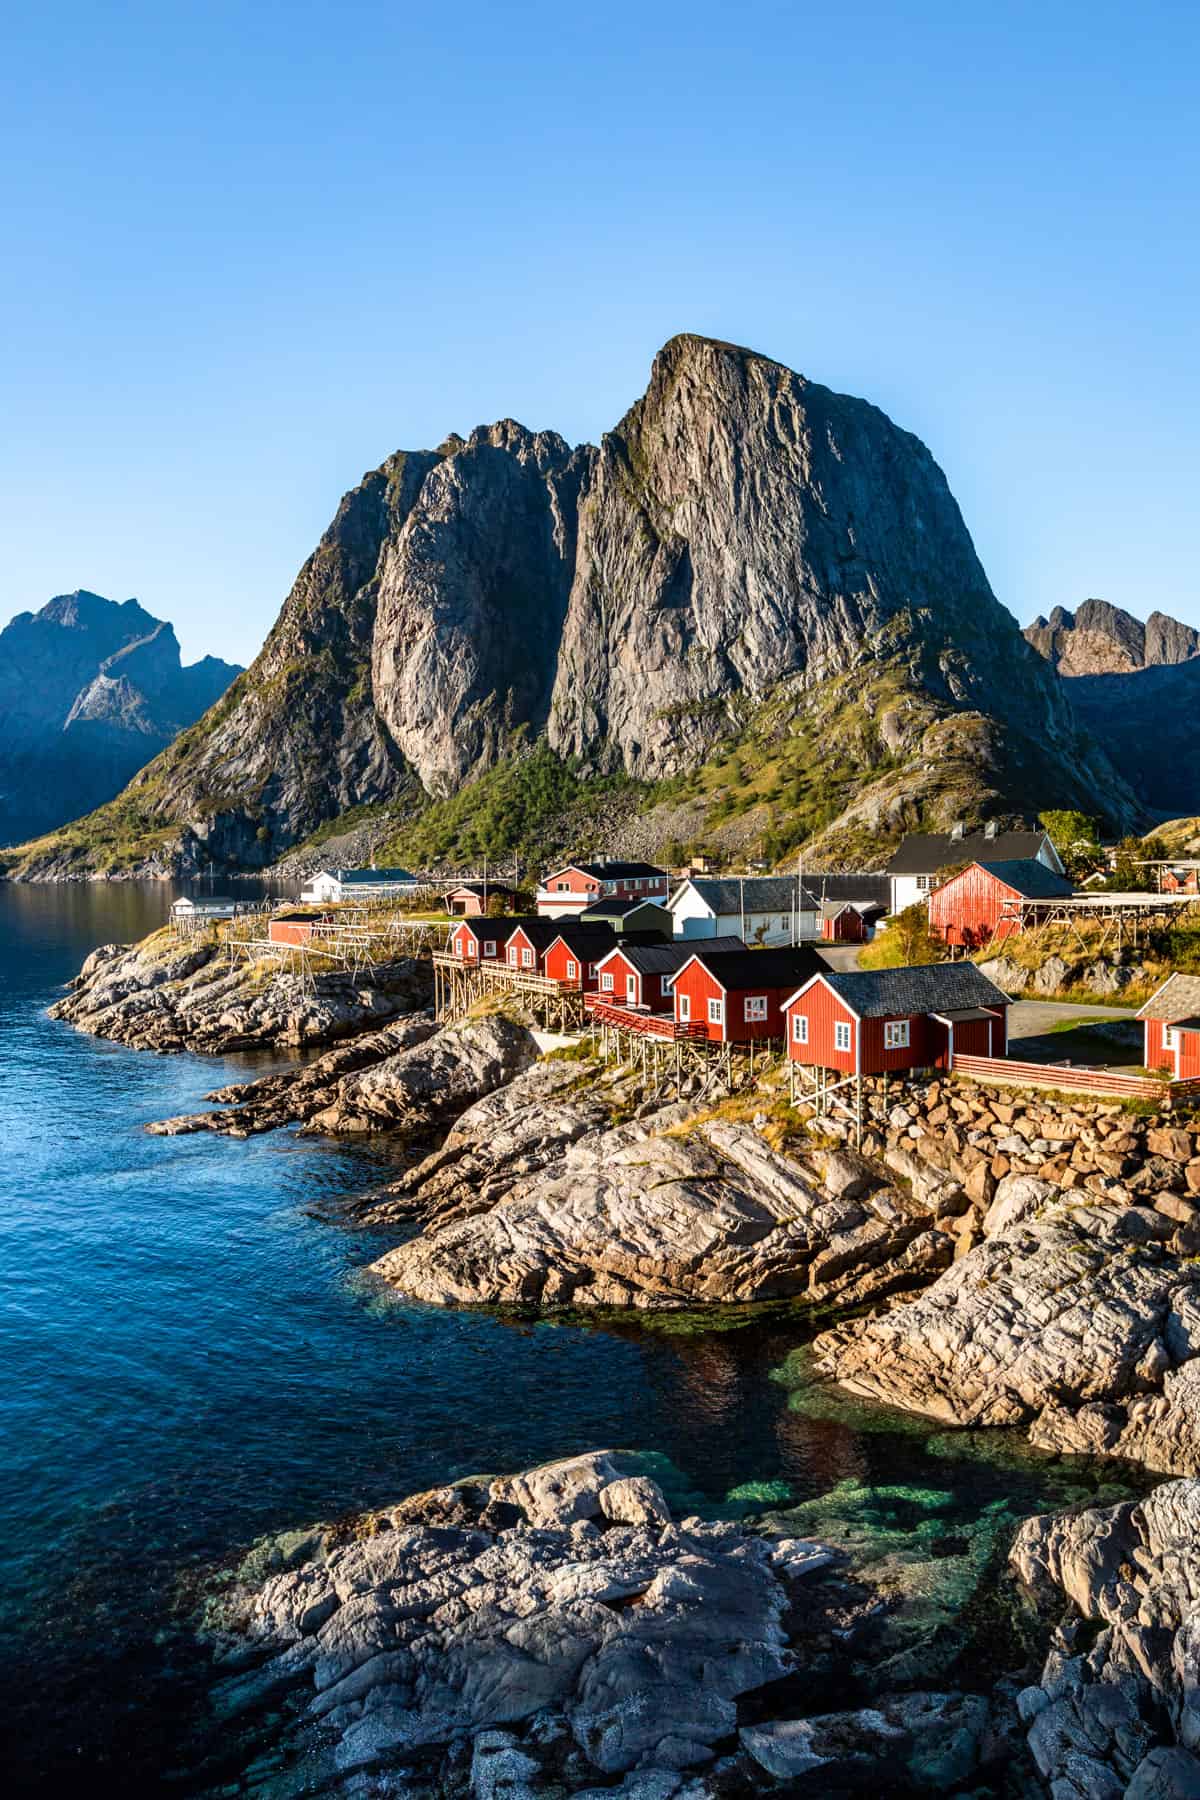 Photo of the famous red fisherman houses by the sea backed by mountains in the town of Reine, Norway.